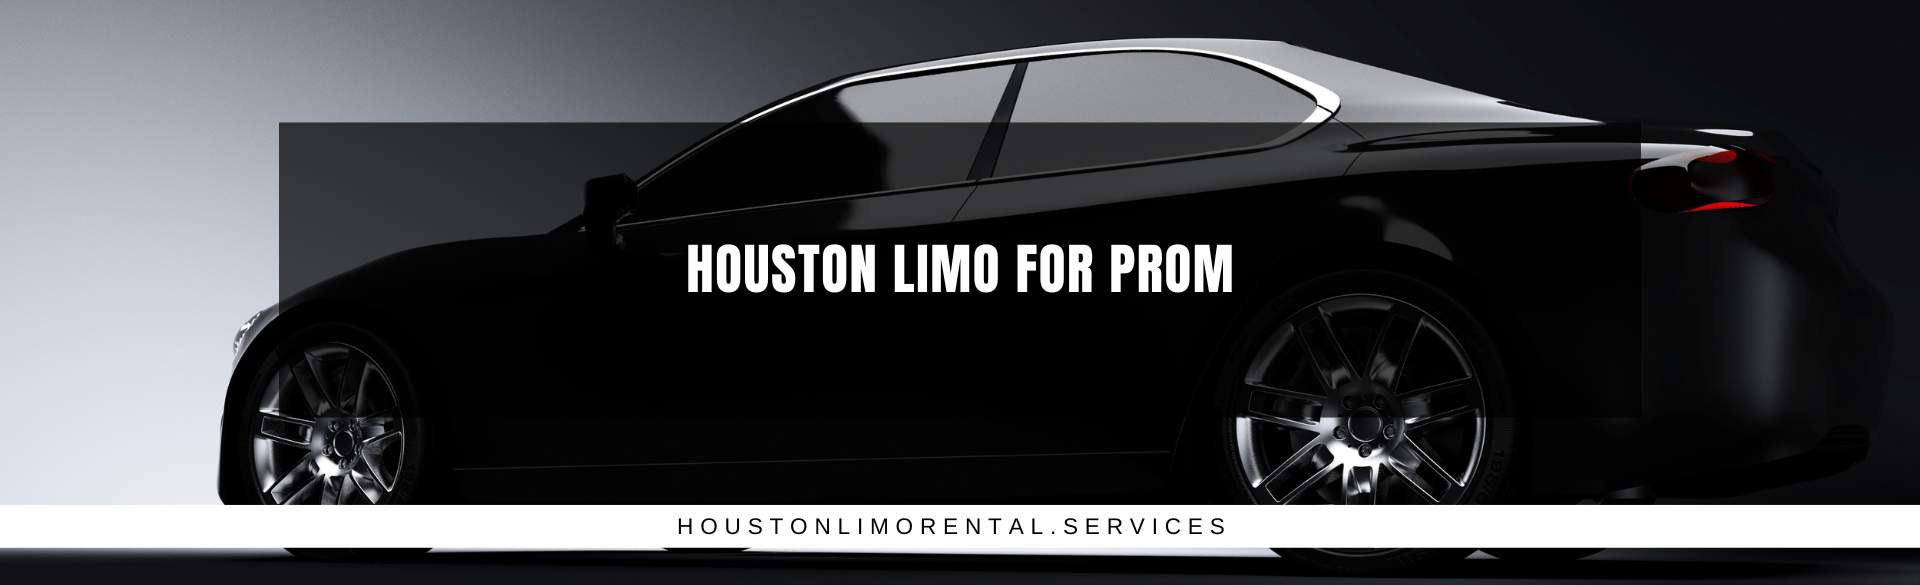 Houston Limo for Prom